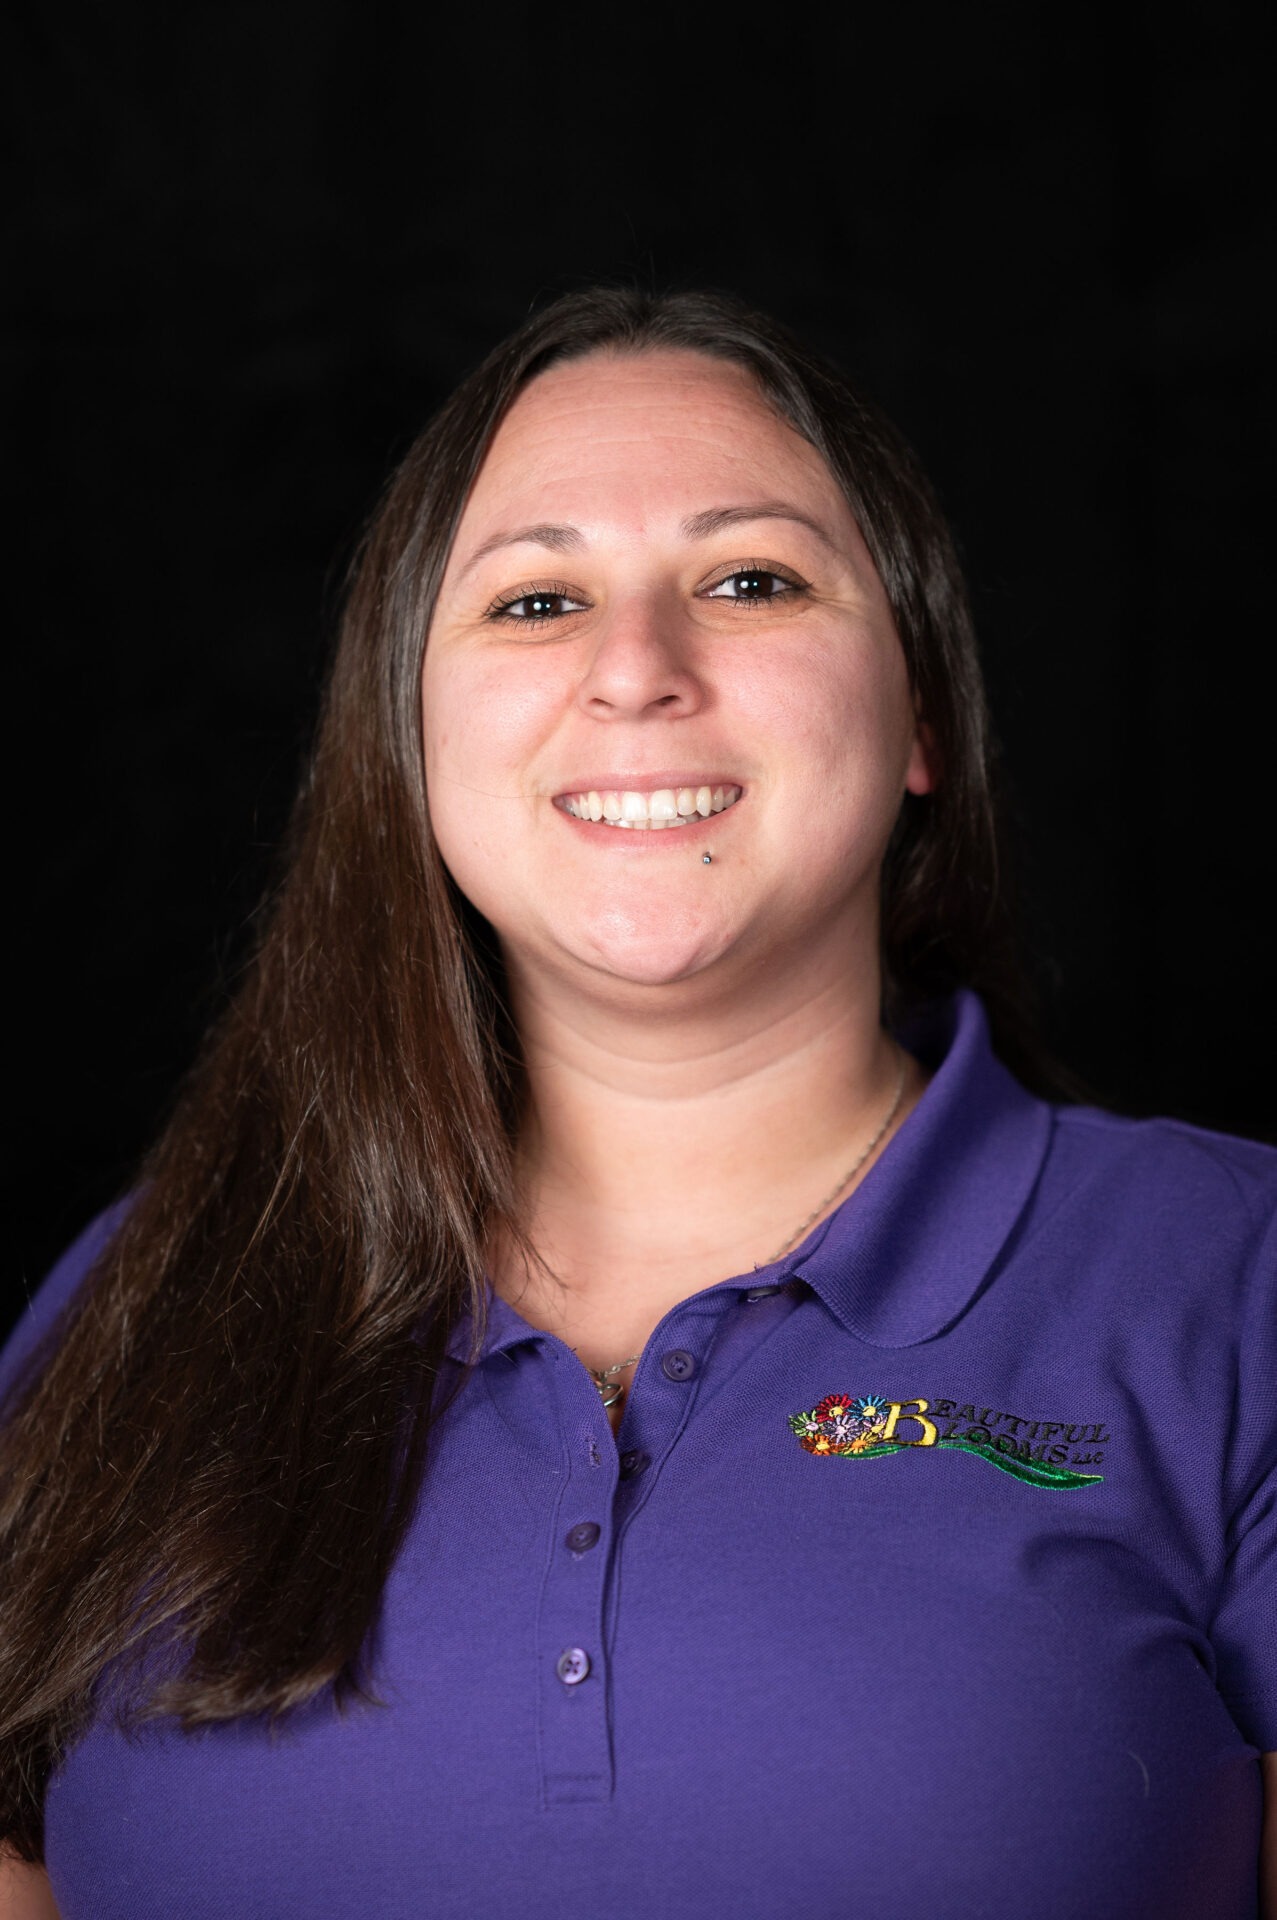 A smiling person with long brown hair is wearing a purple polo shirt with an embroidered logo on a black background. They exude a friendly demeanor.